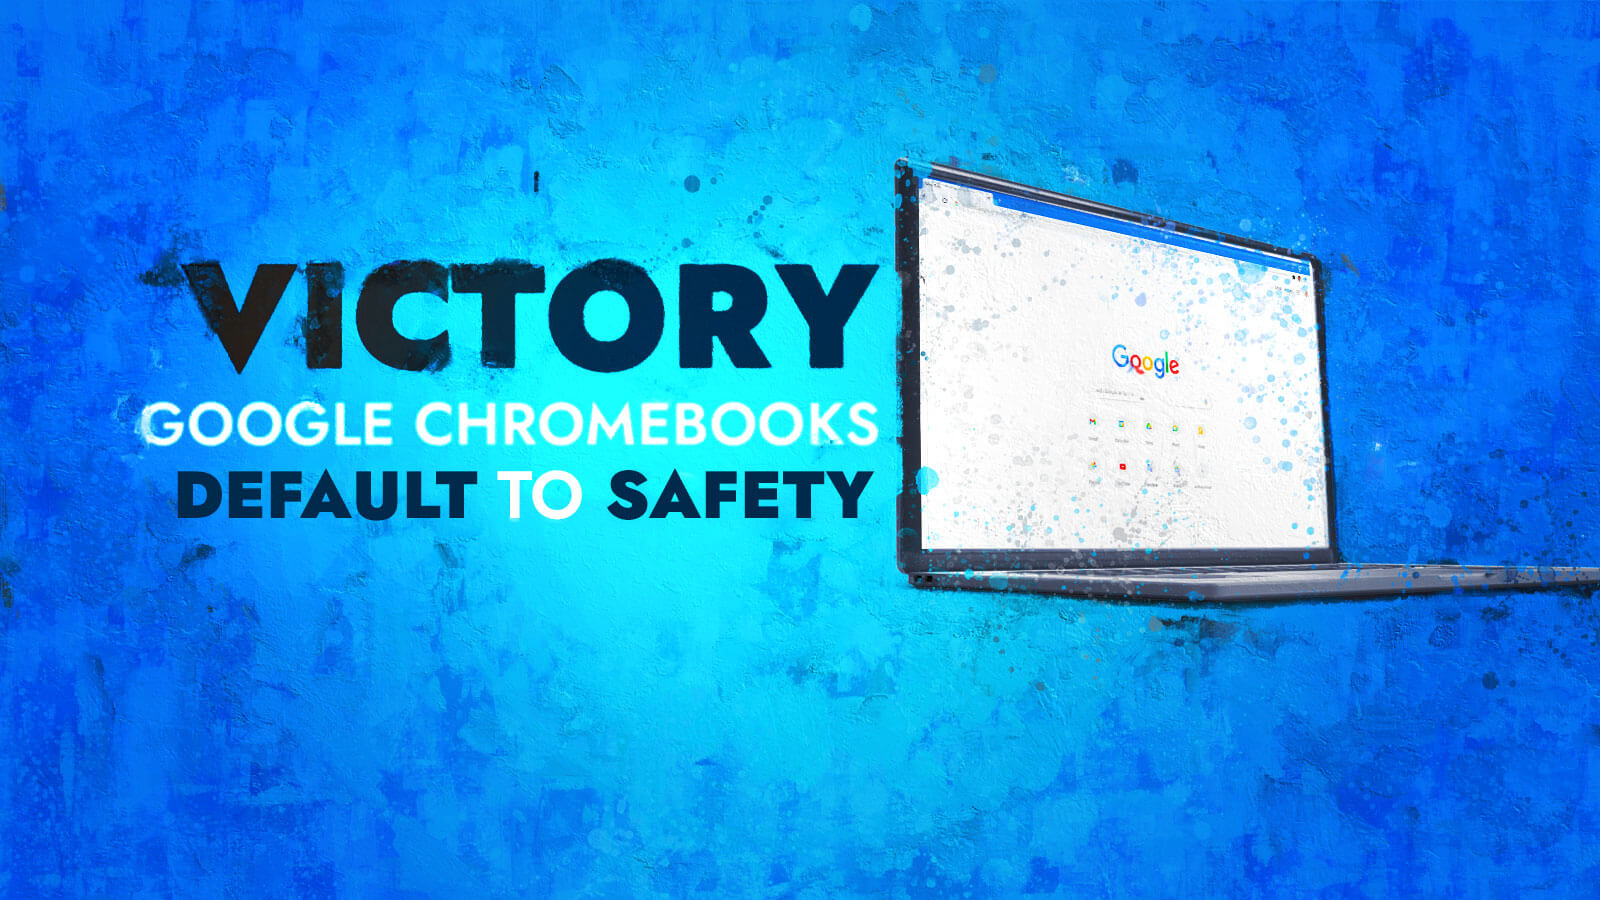 Victory - Google Chromebooks default to safety